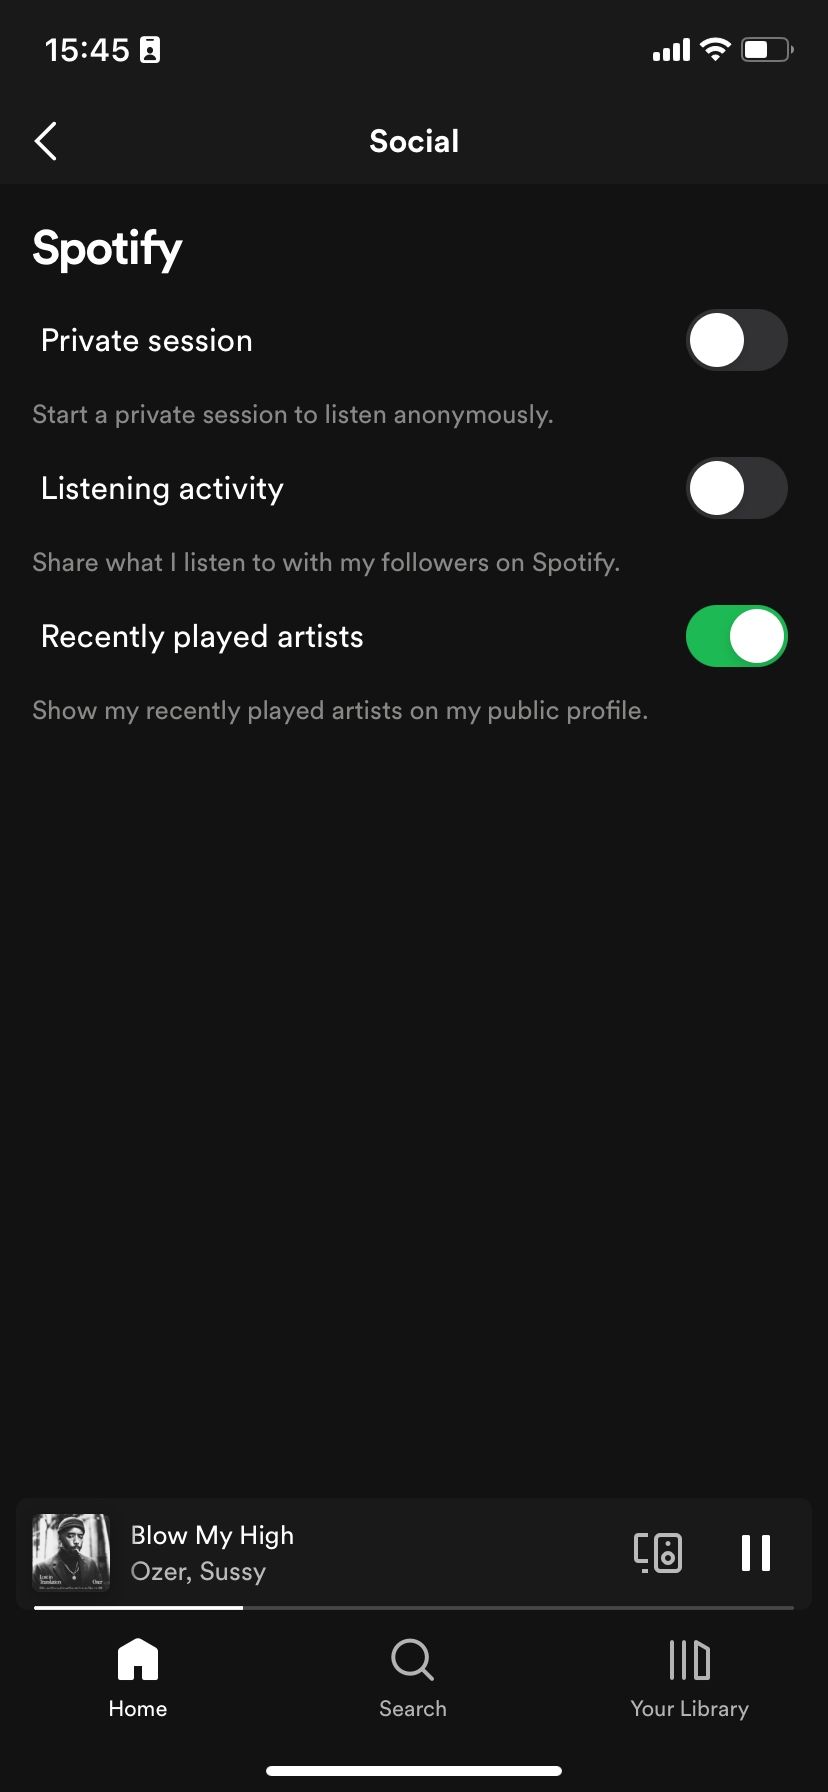 Sharing listening activity disabled on Spotify mobile